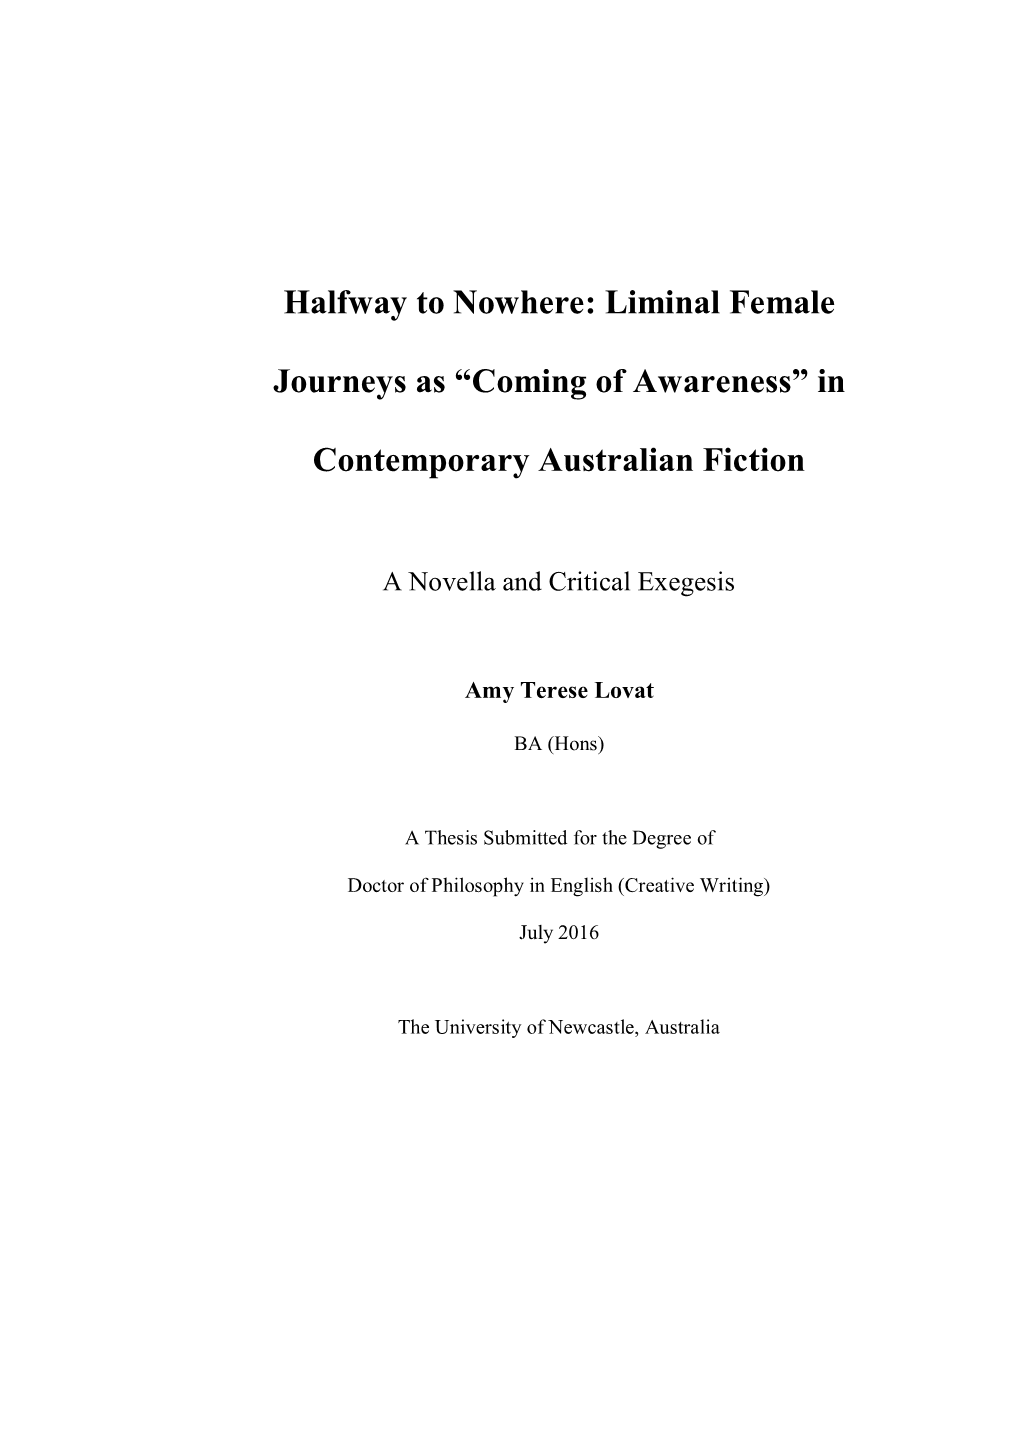 Halfway to Nowhere: Liminal Female Journeys As “Coming of Awareness” In